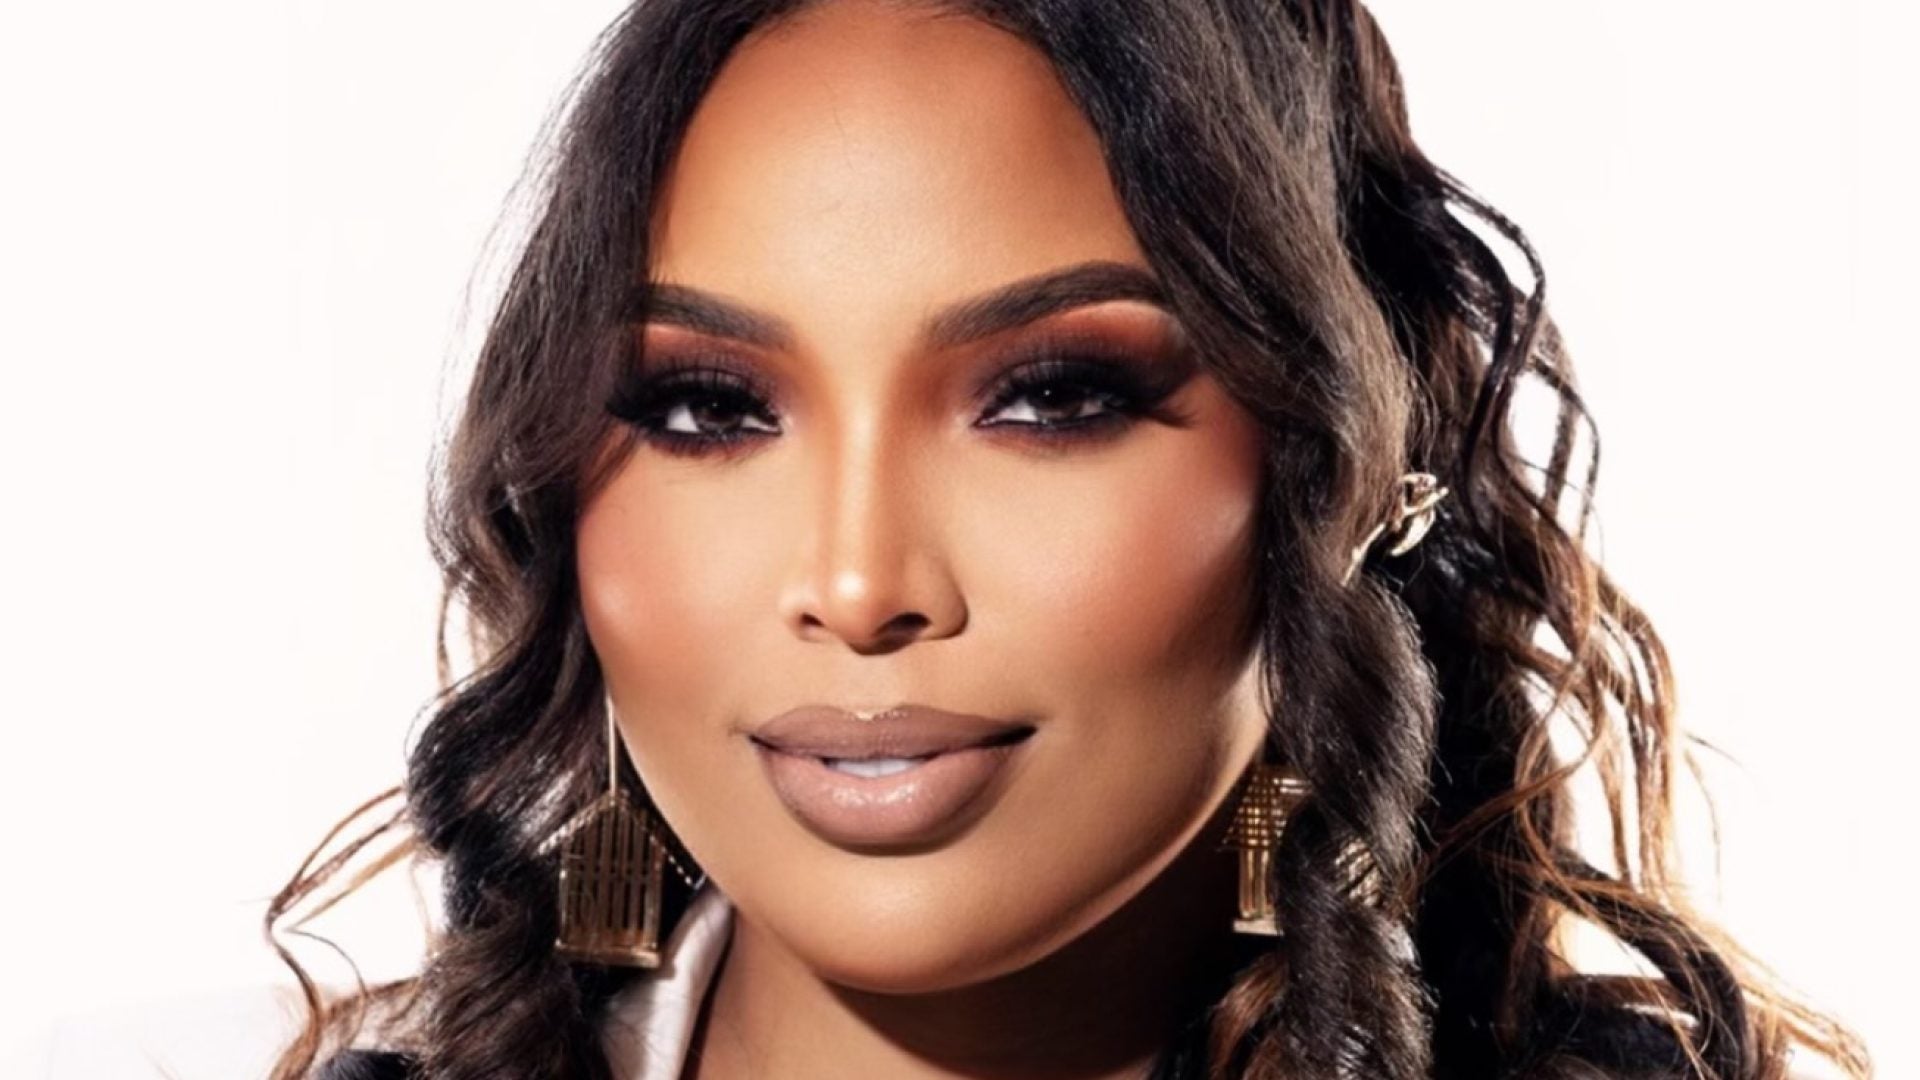 Losing Both Of Her Parents Back To Back Shaped Former 'Black Ink Crew' Star Charmaine Bey As A Mother